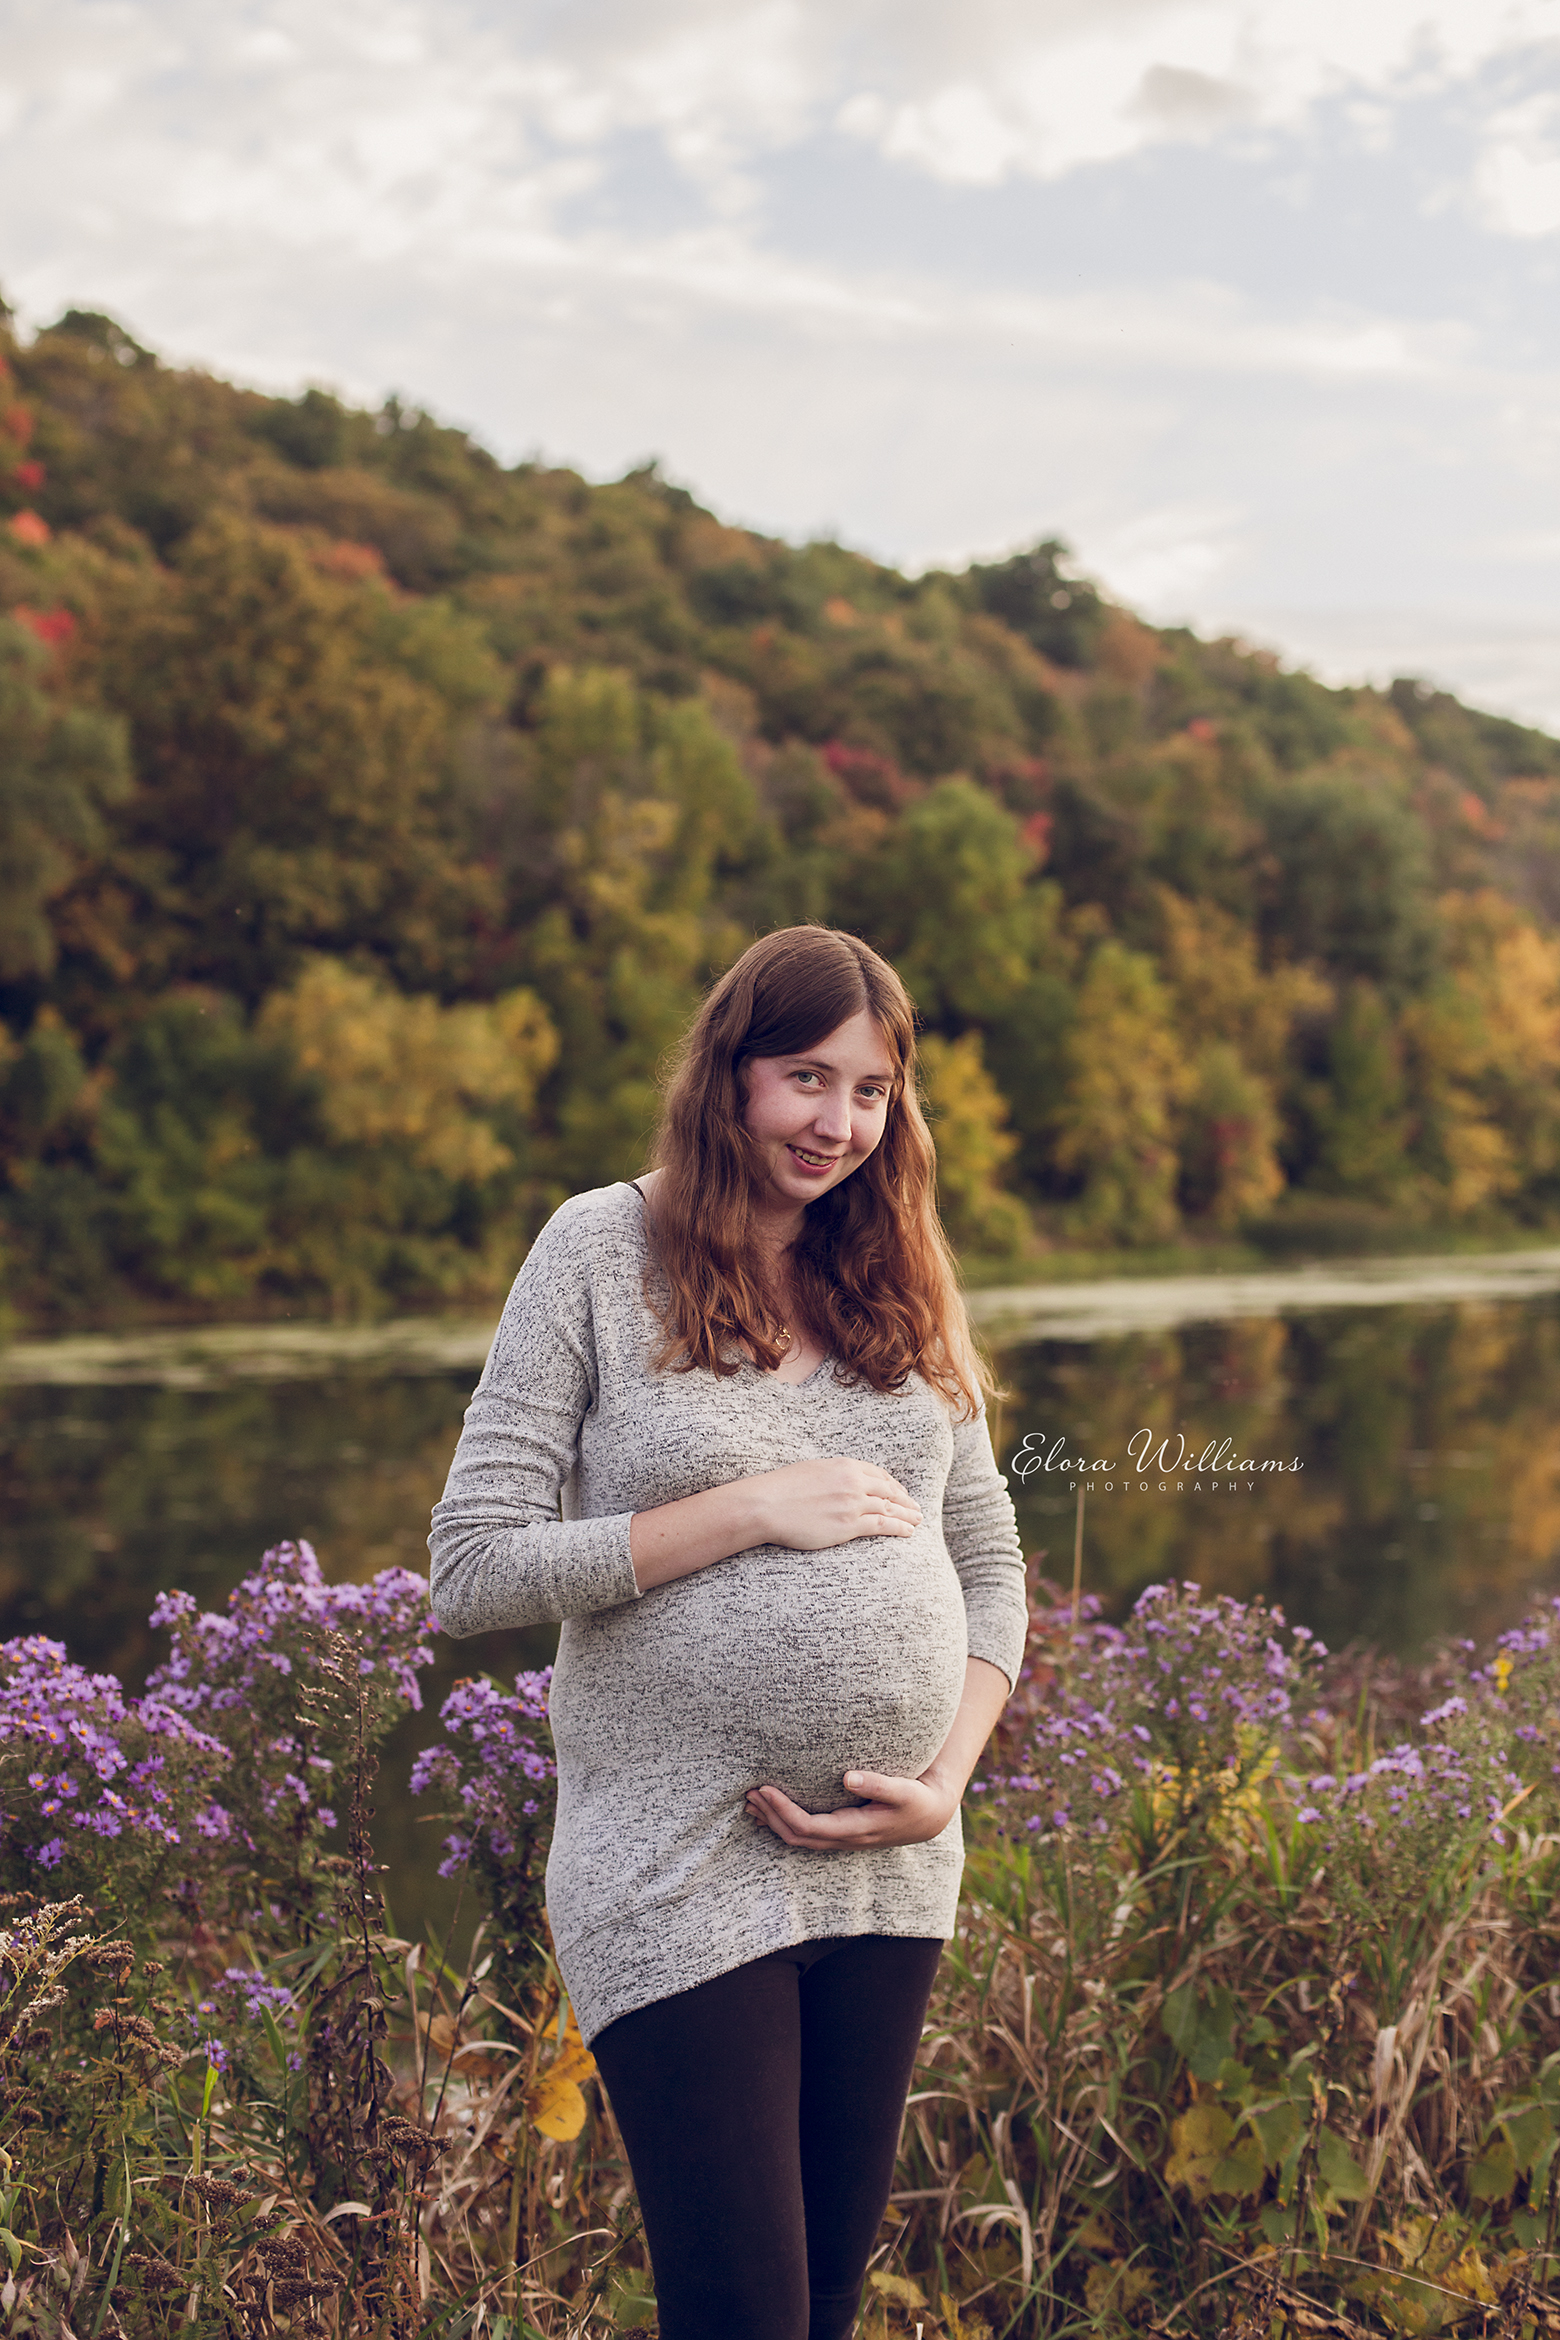 Outdoor Maternity |  St Catharines, Elora Williams Photography